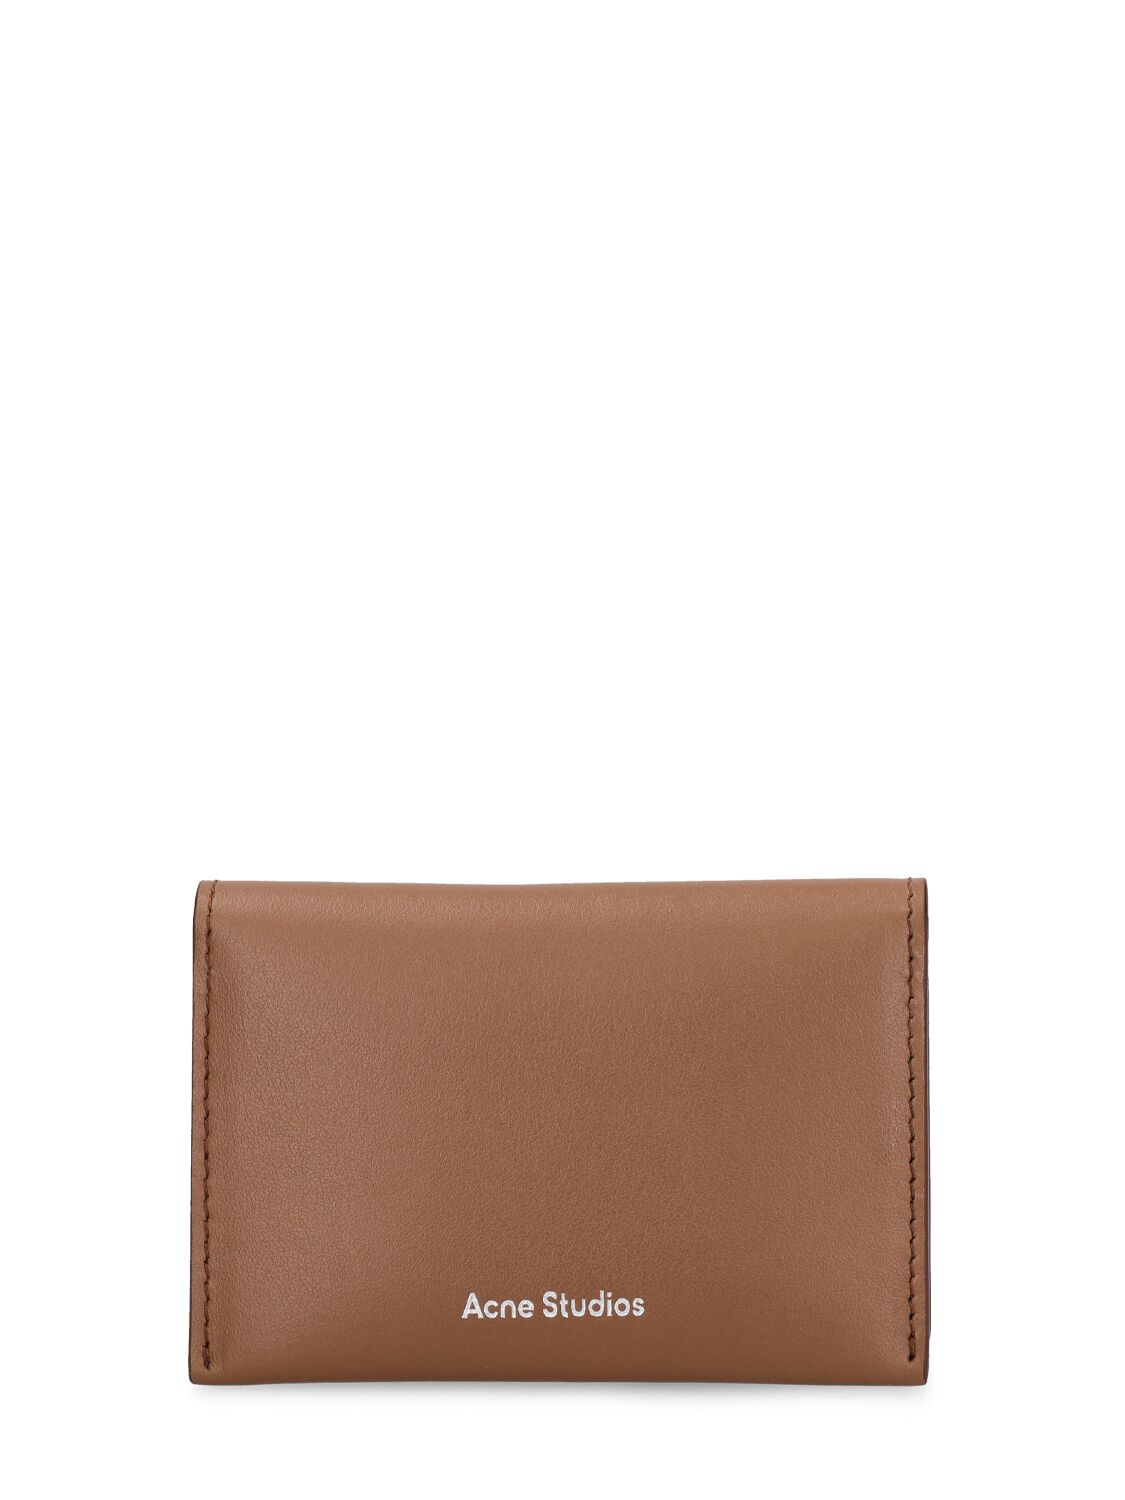 Flap Leather Card Holder